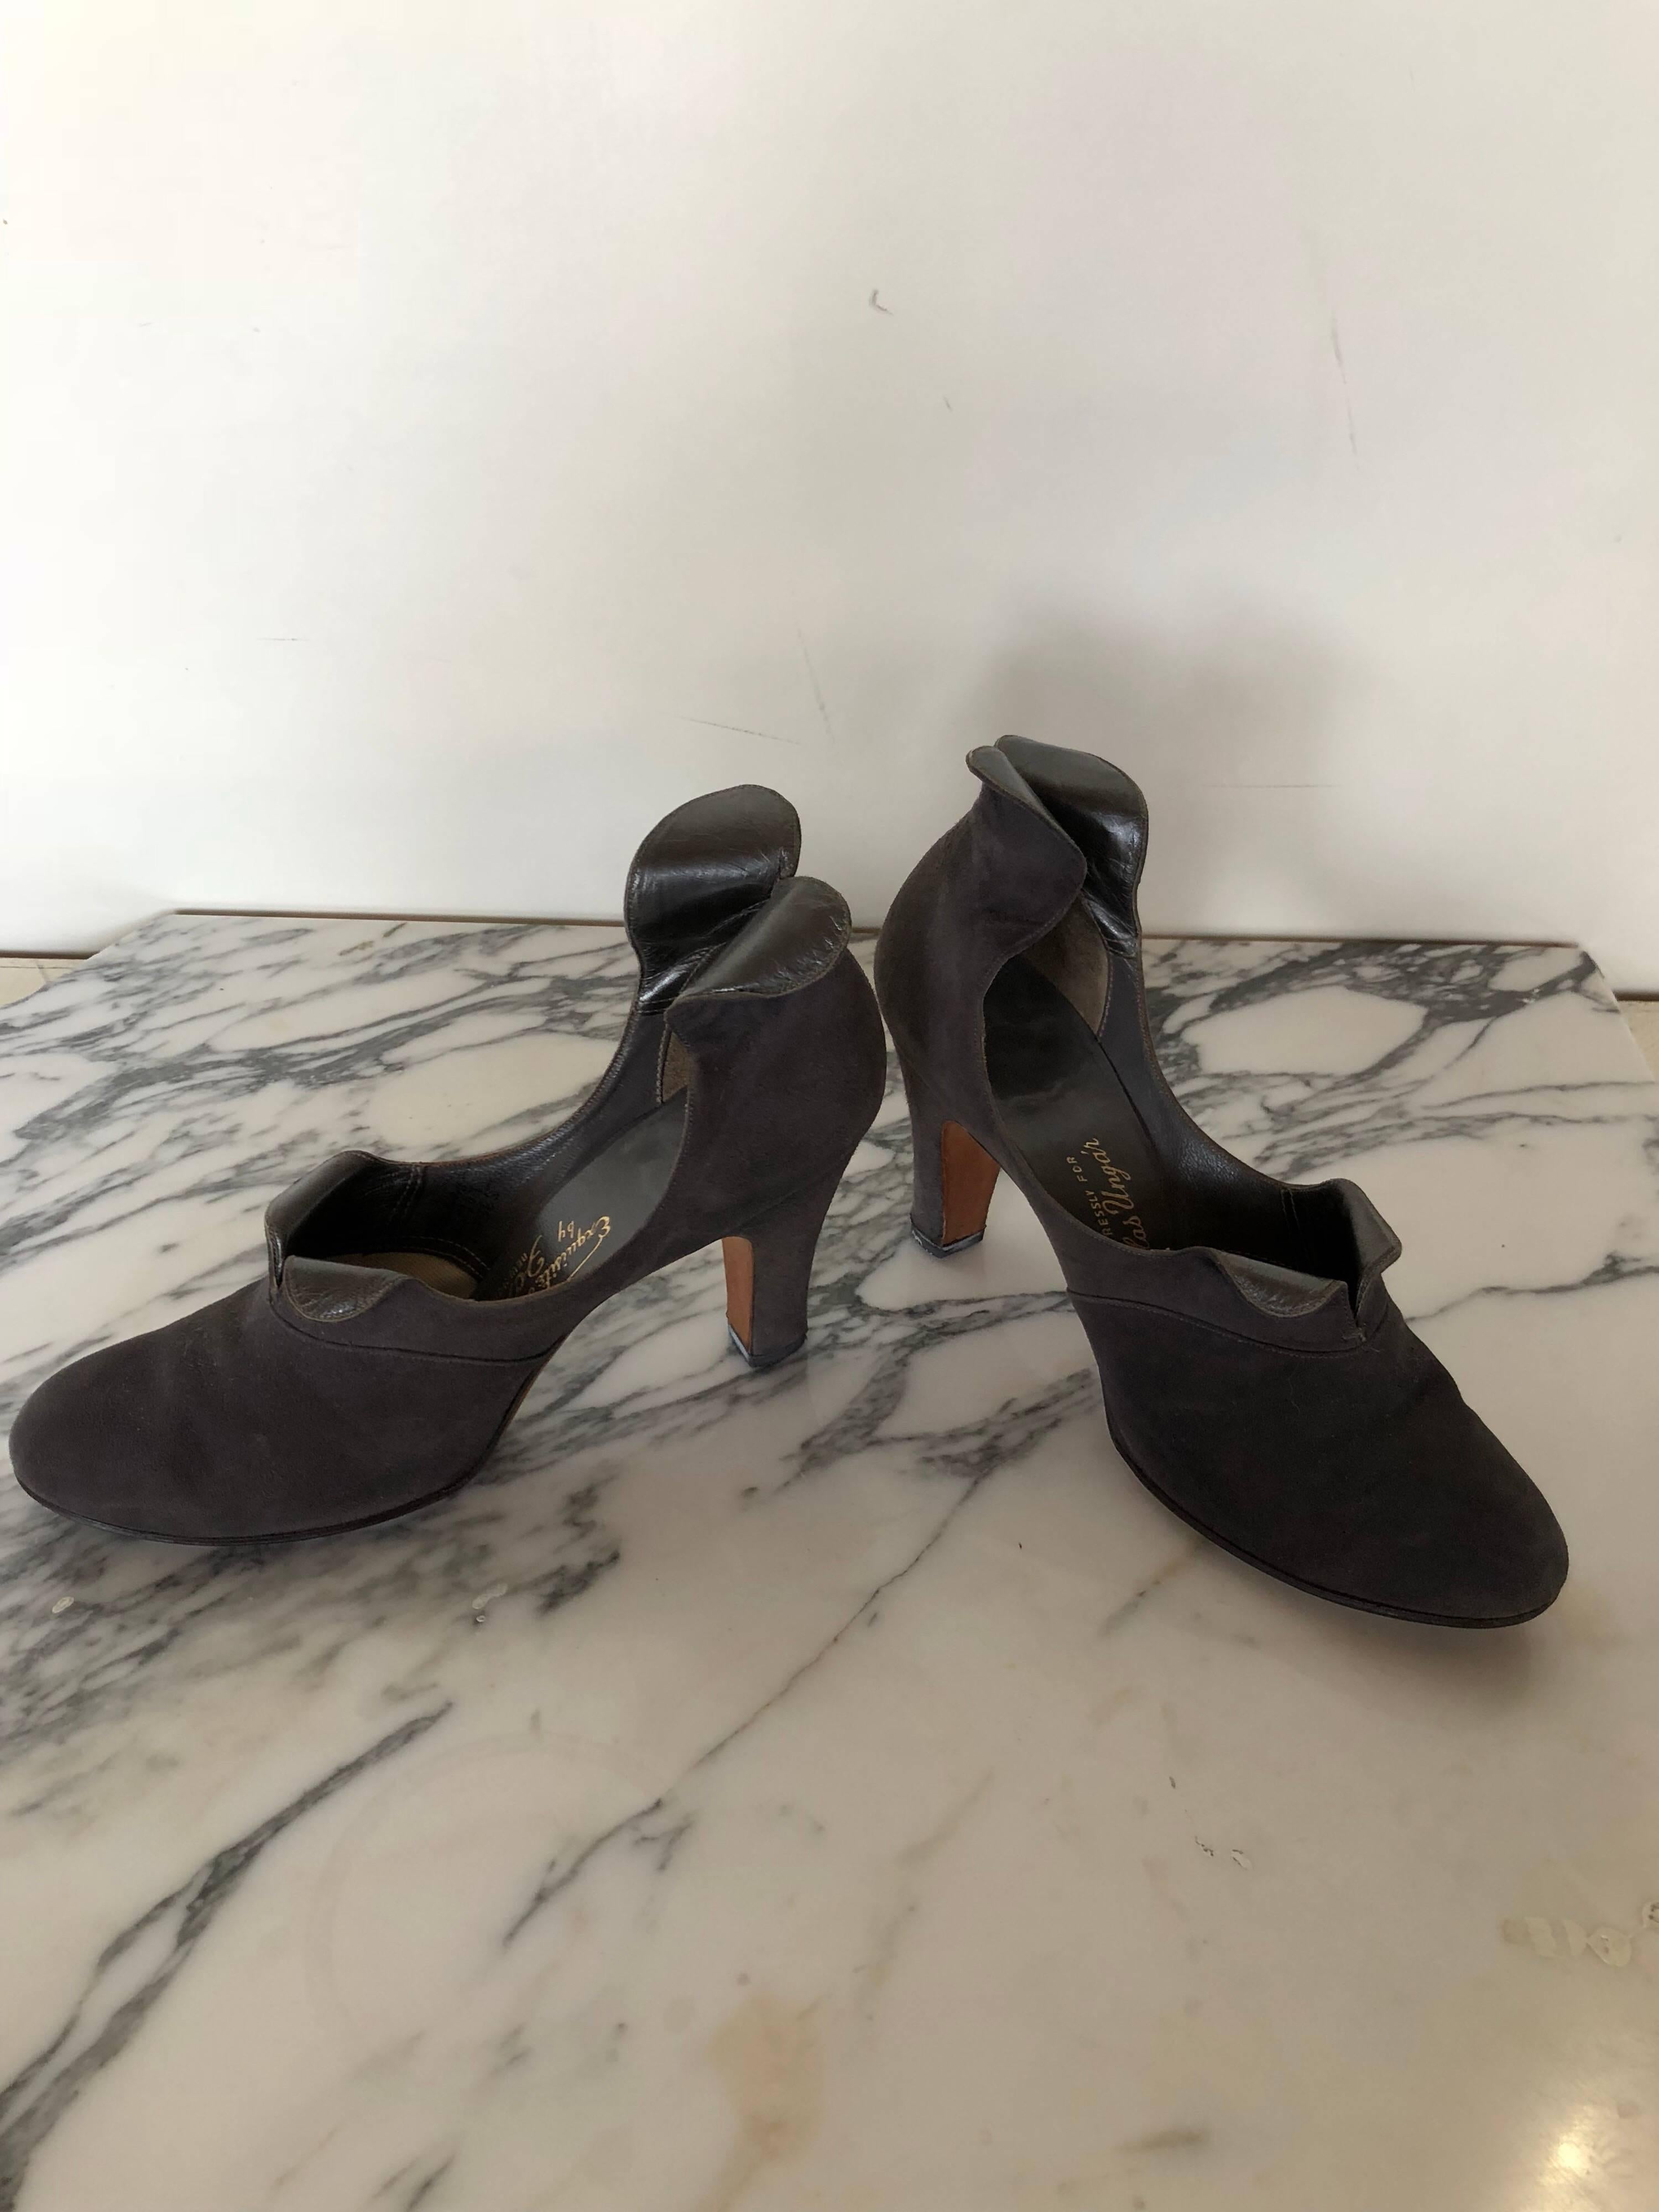 Nicholas Ungar Suede D'Orsay Shoes With Sculptural Rolled Tab Design, 1940s For Sale 1